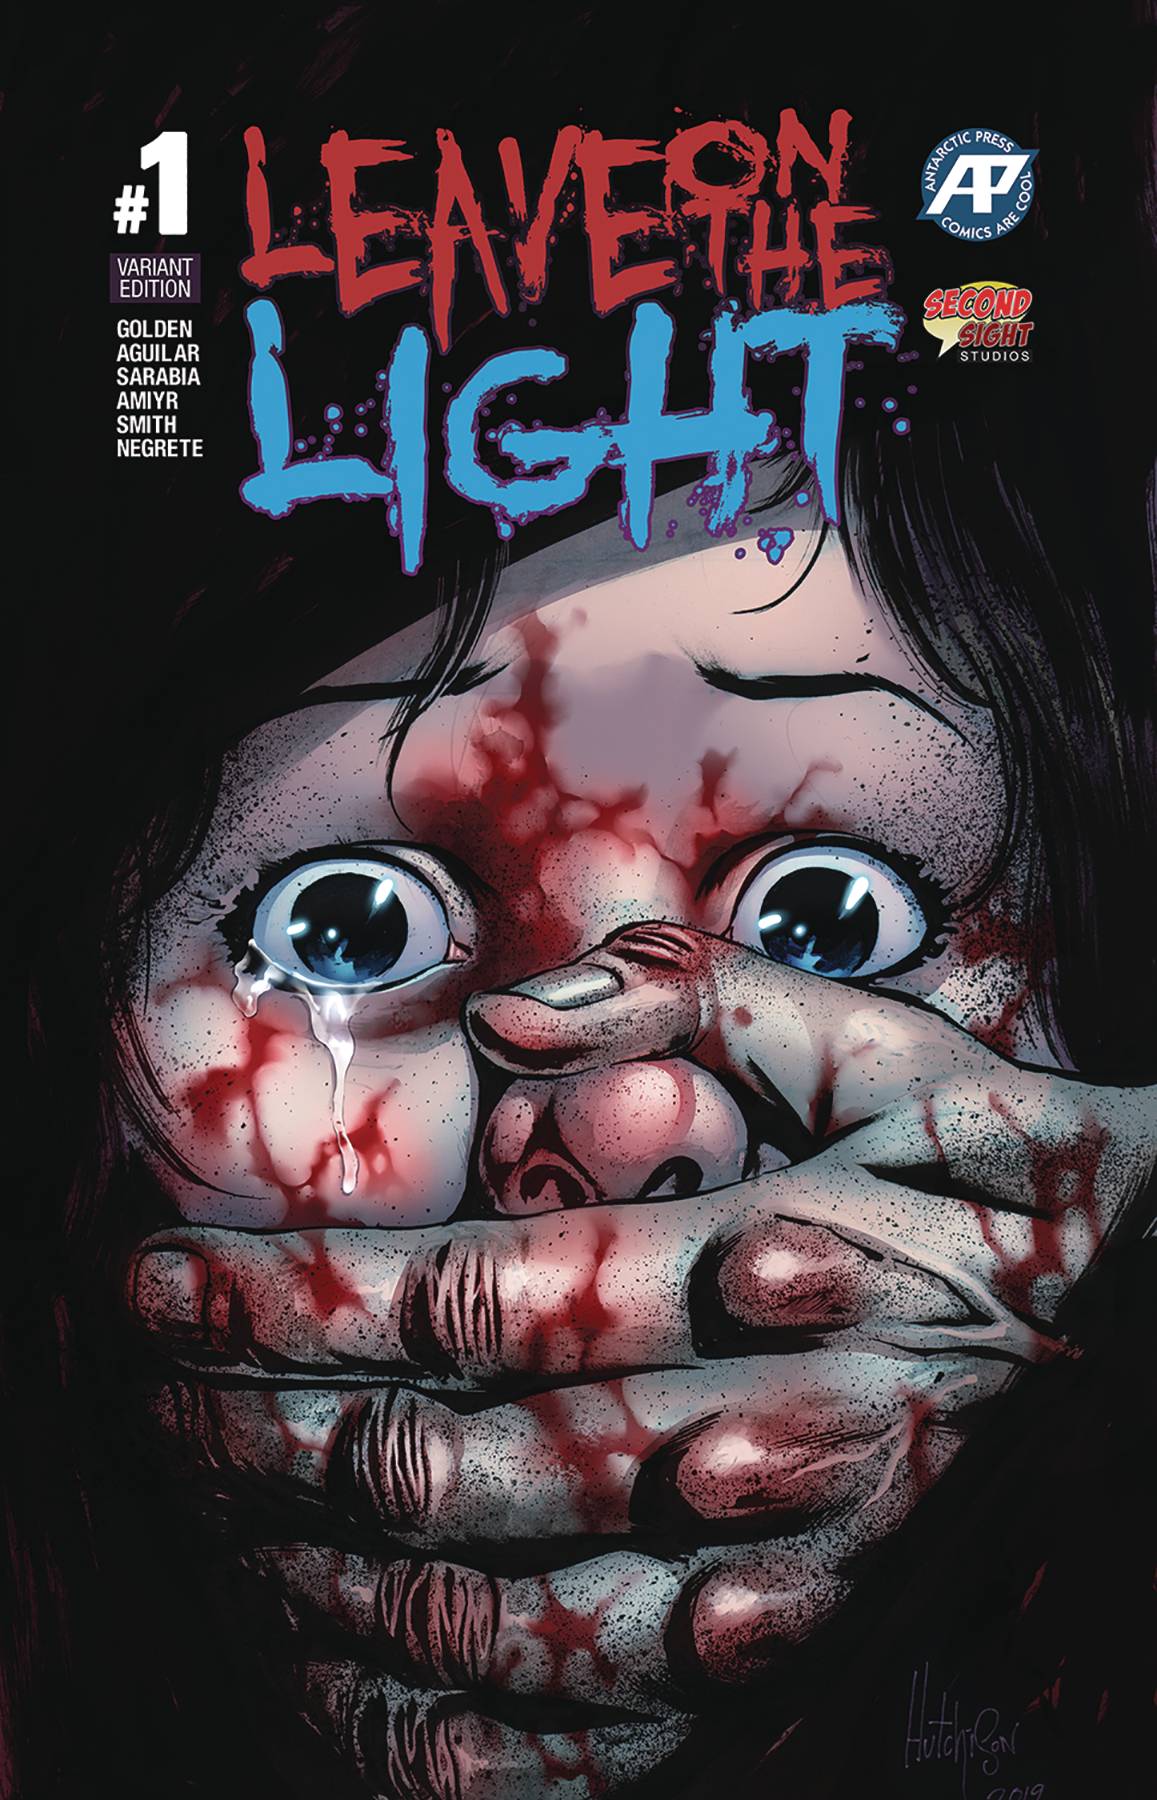 LEAVE ON THE LIGHT #1 (OF 3) FOIL VARIANT COVER 07/03/19